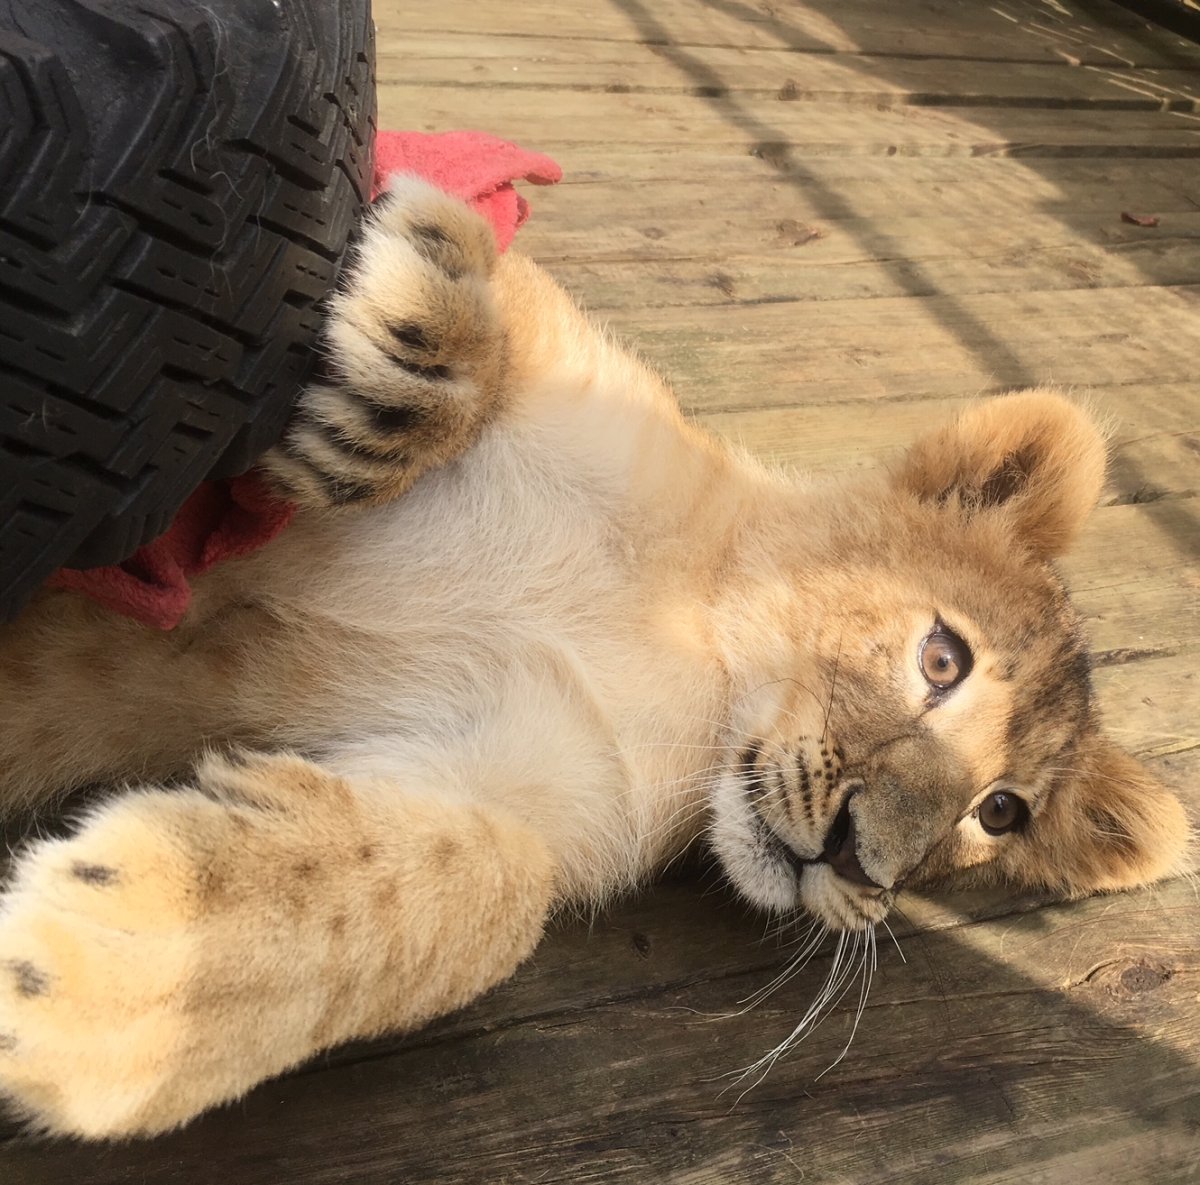 Wellington County OPP says the 60 pound lion cub escaped her enclosure in Kenilworth, Ont. on Thursday morning.